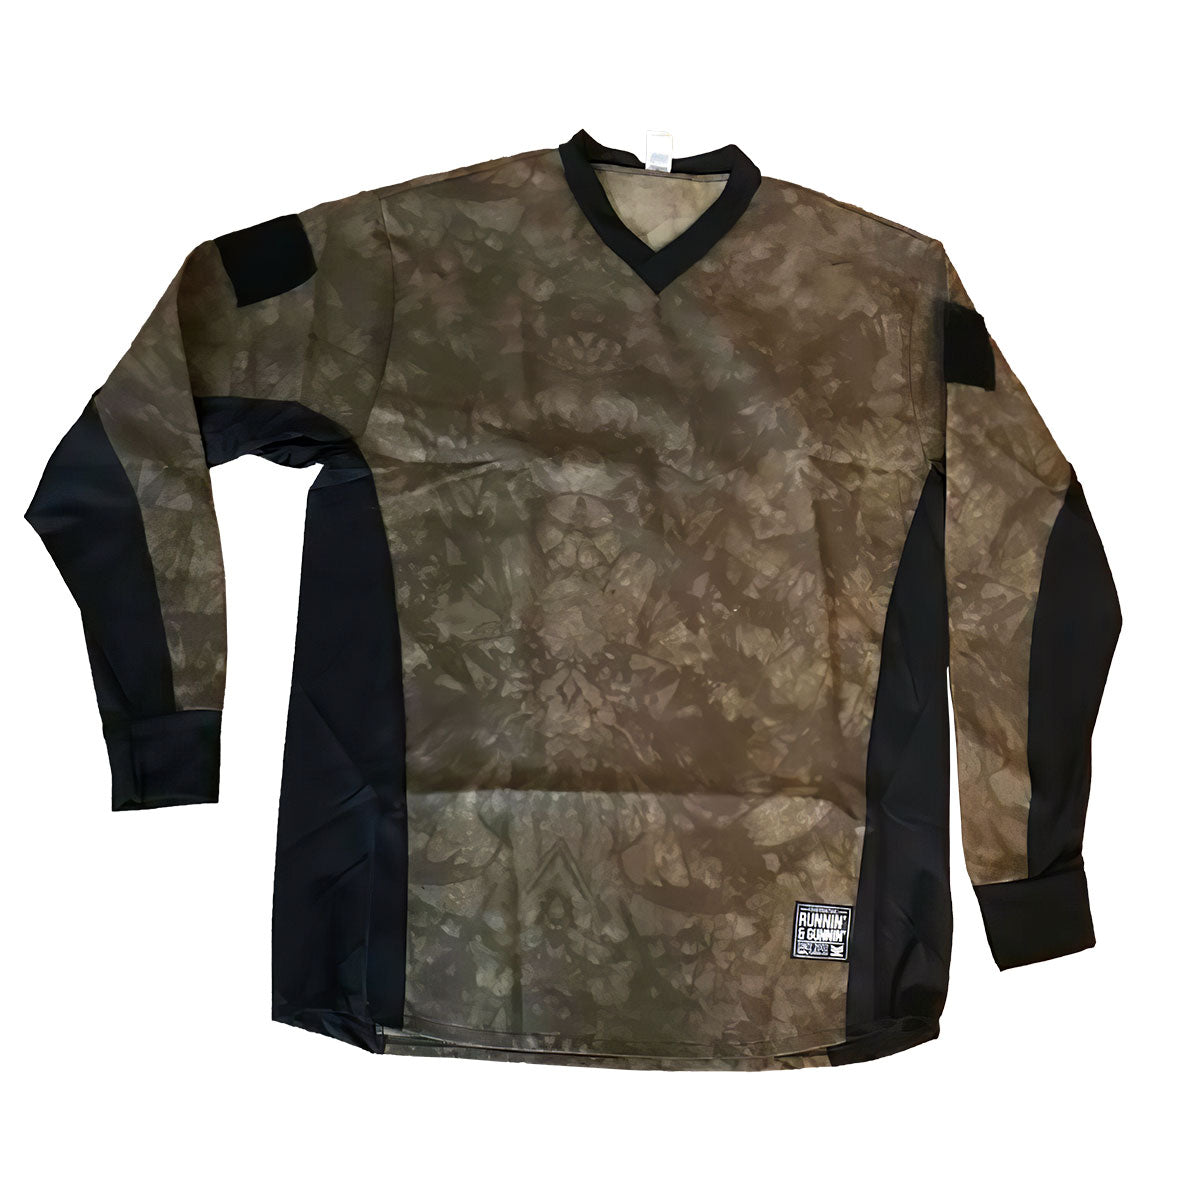 Grit O.G. Renegade Jersey, Brown Leaf | Social Paintball Jersey